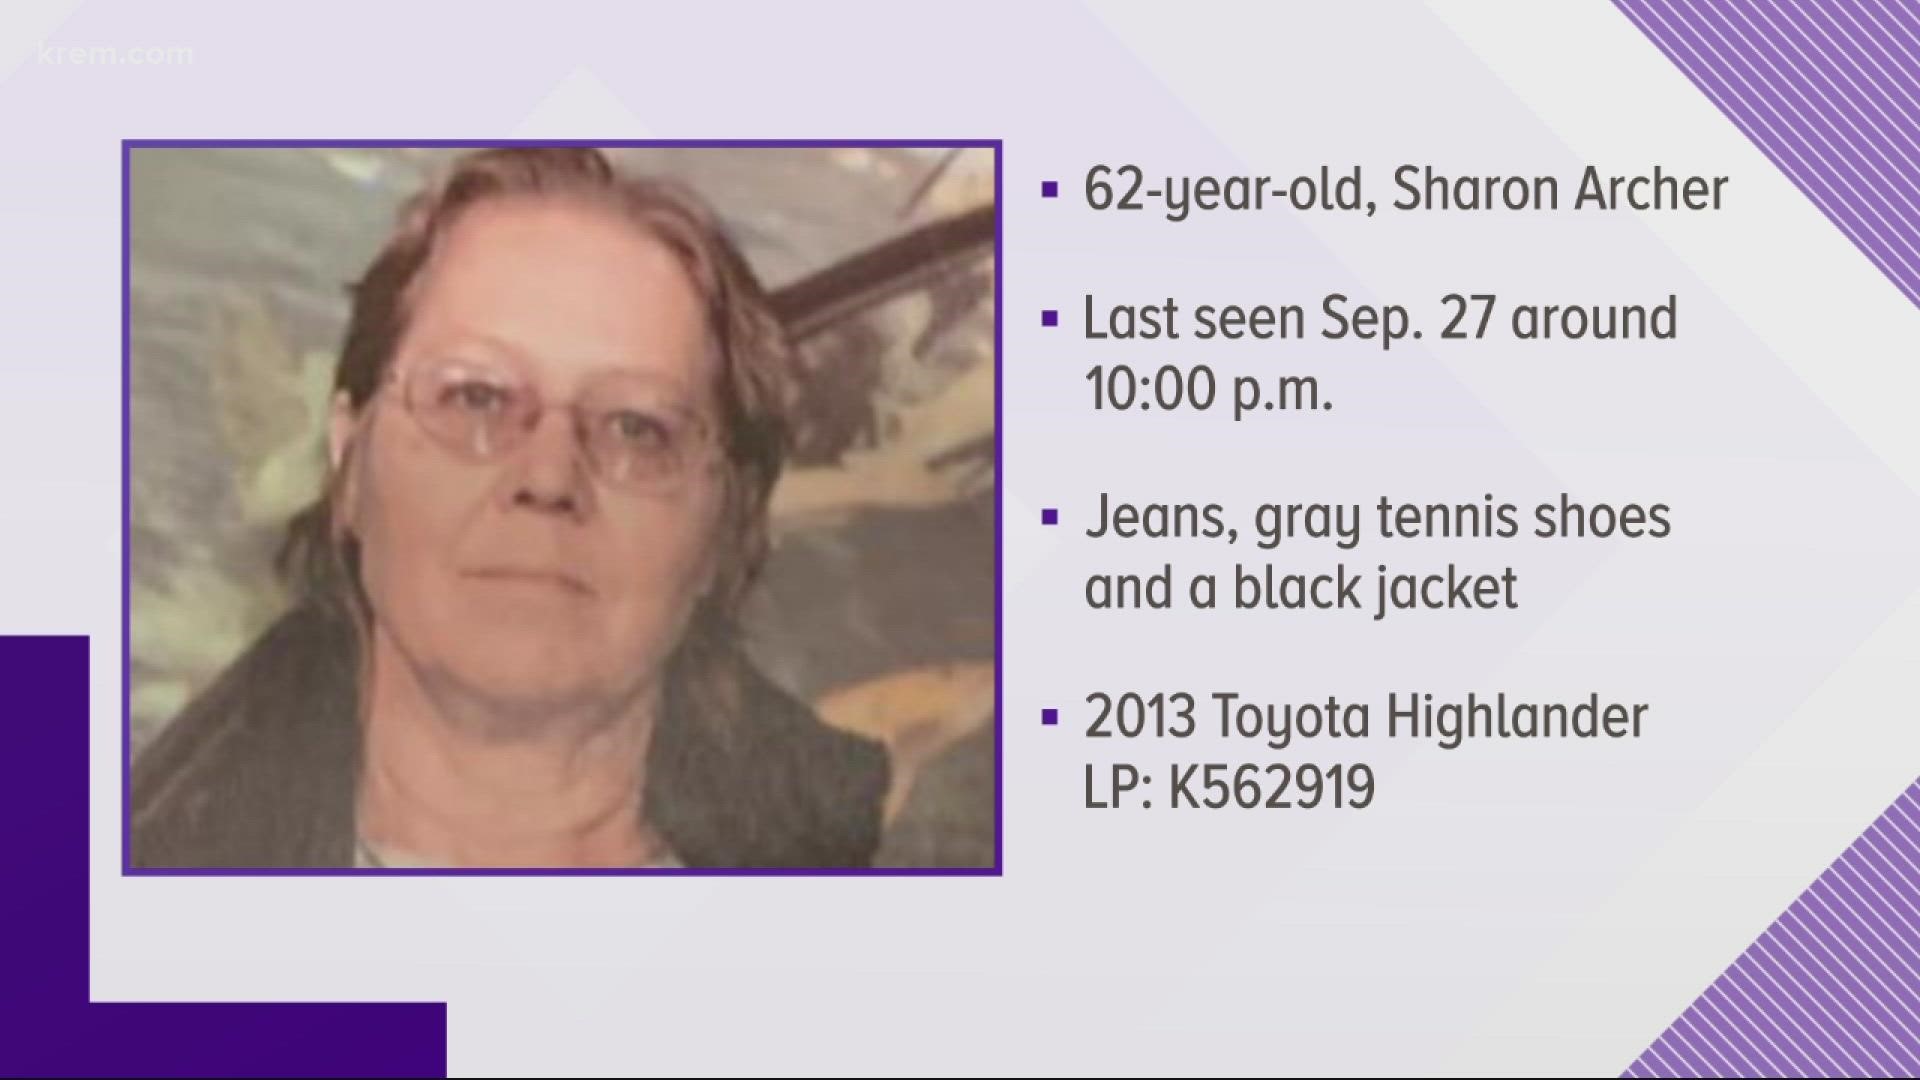 Sharon Archer, 62, was last seen at her home in the area of 5th Street and Locust Avenue on Monday at 10 p.m.